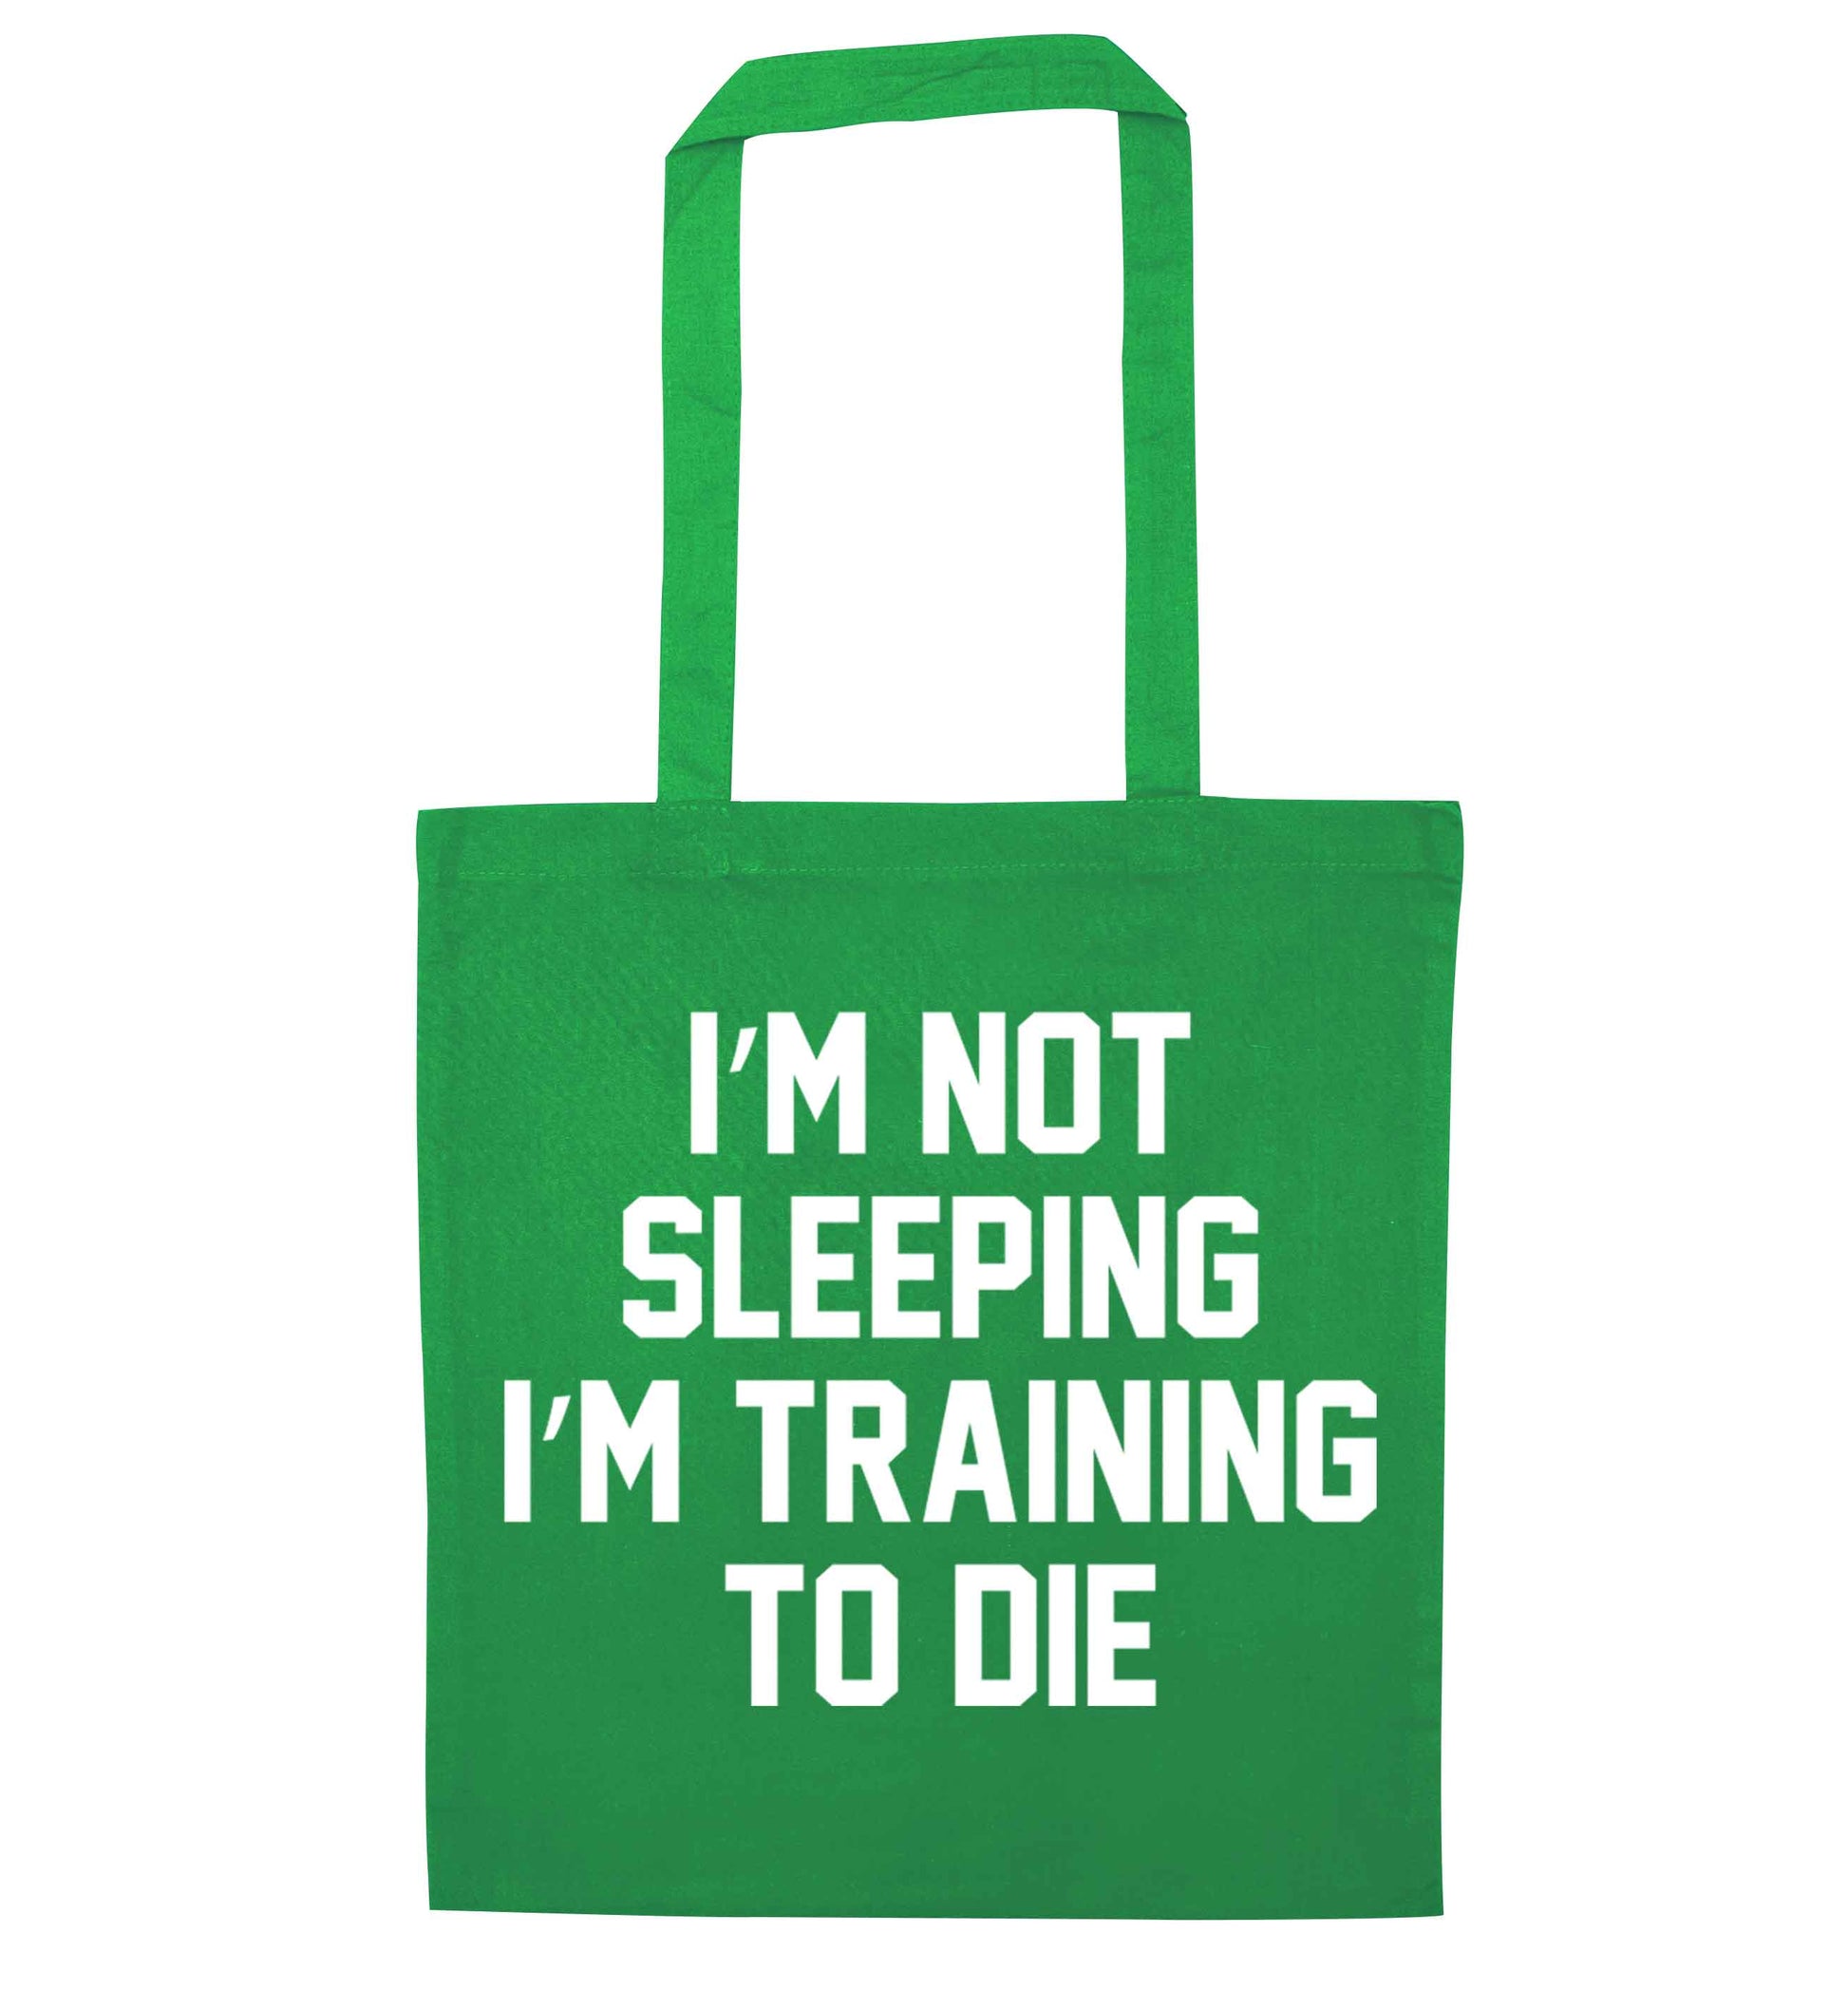 I'm not sleeping I'm training to die green tote bag